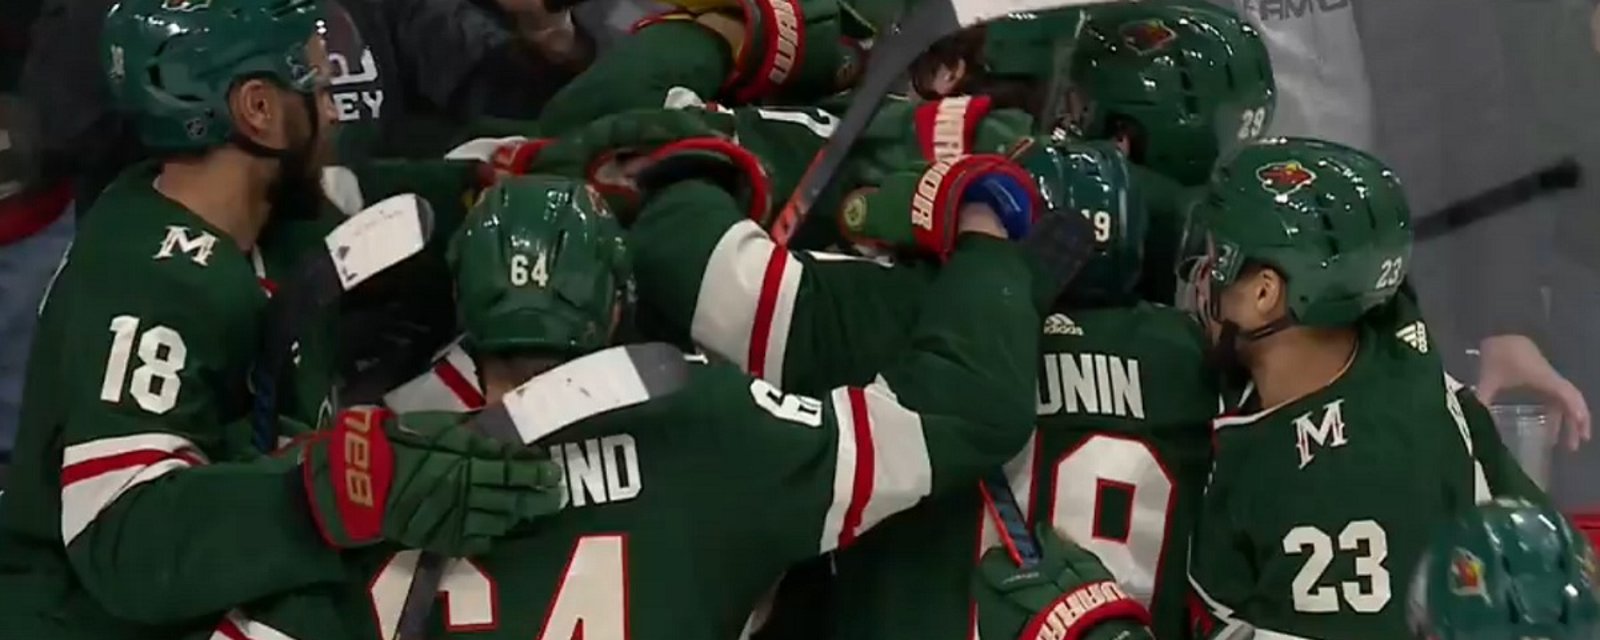 Ryan Donato plays overtime hero in his first home game as a member of the Wild.